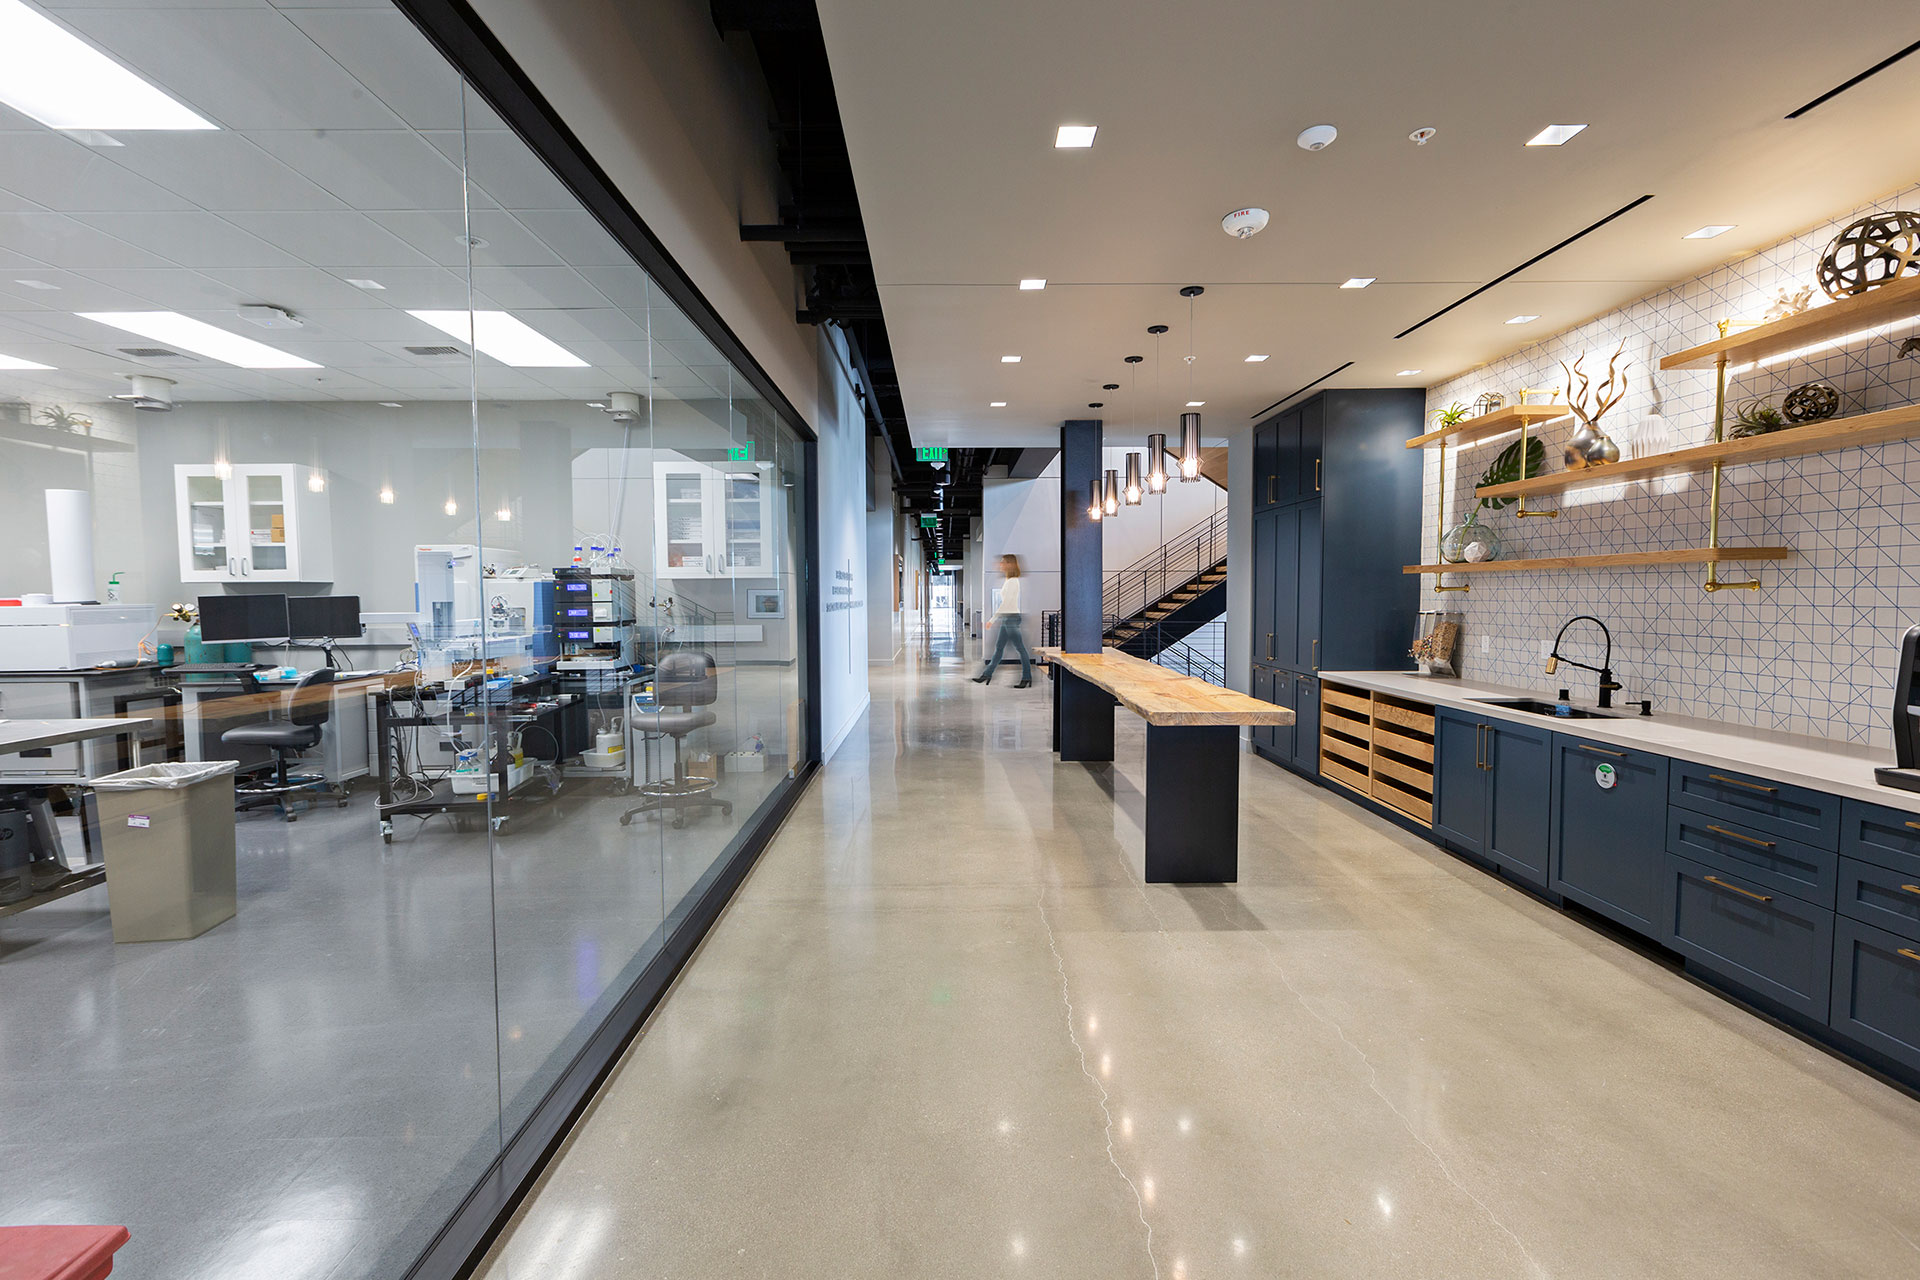 Interior at Takeda Research kitchen, break room to laboratory transparency